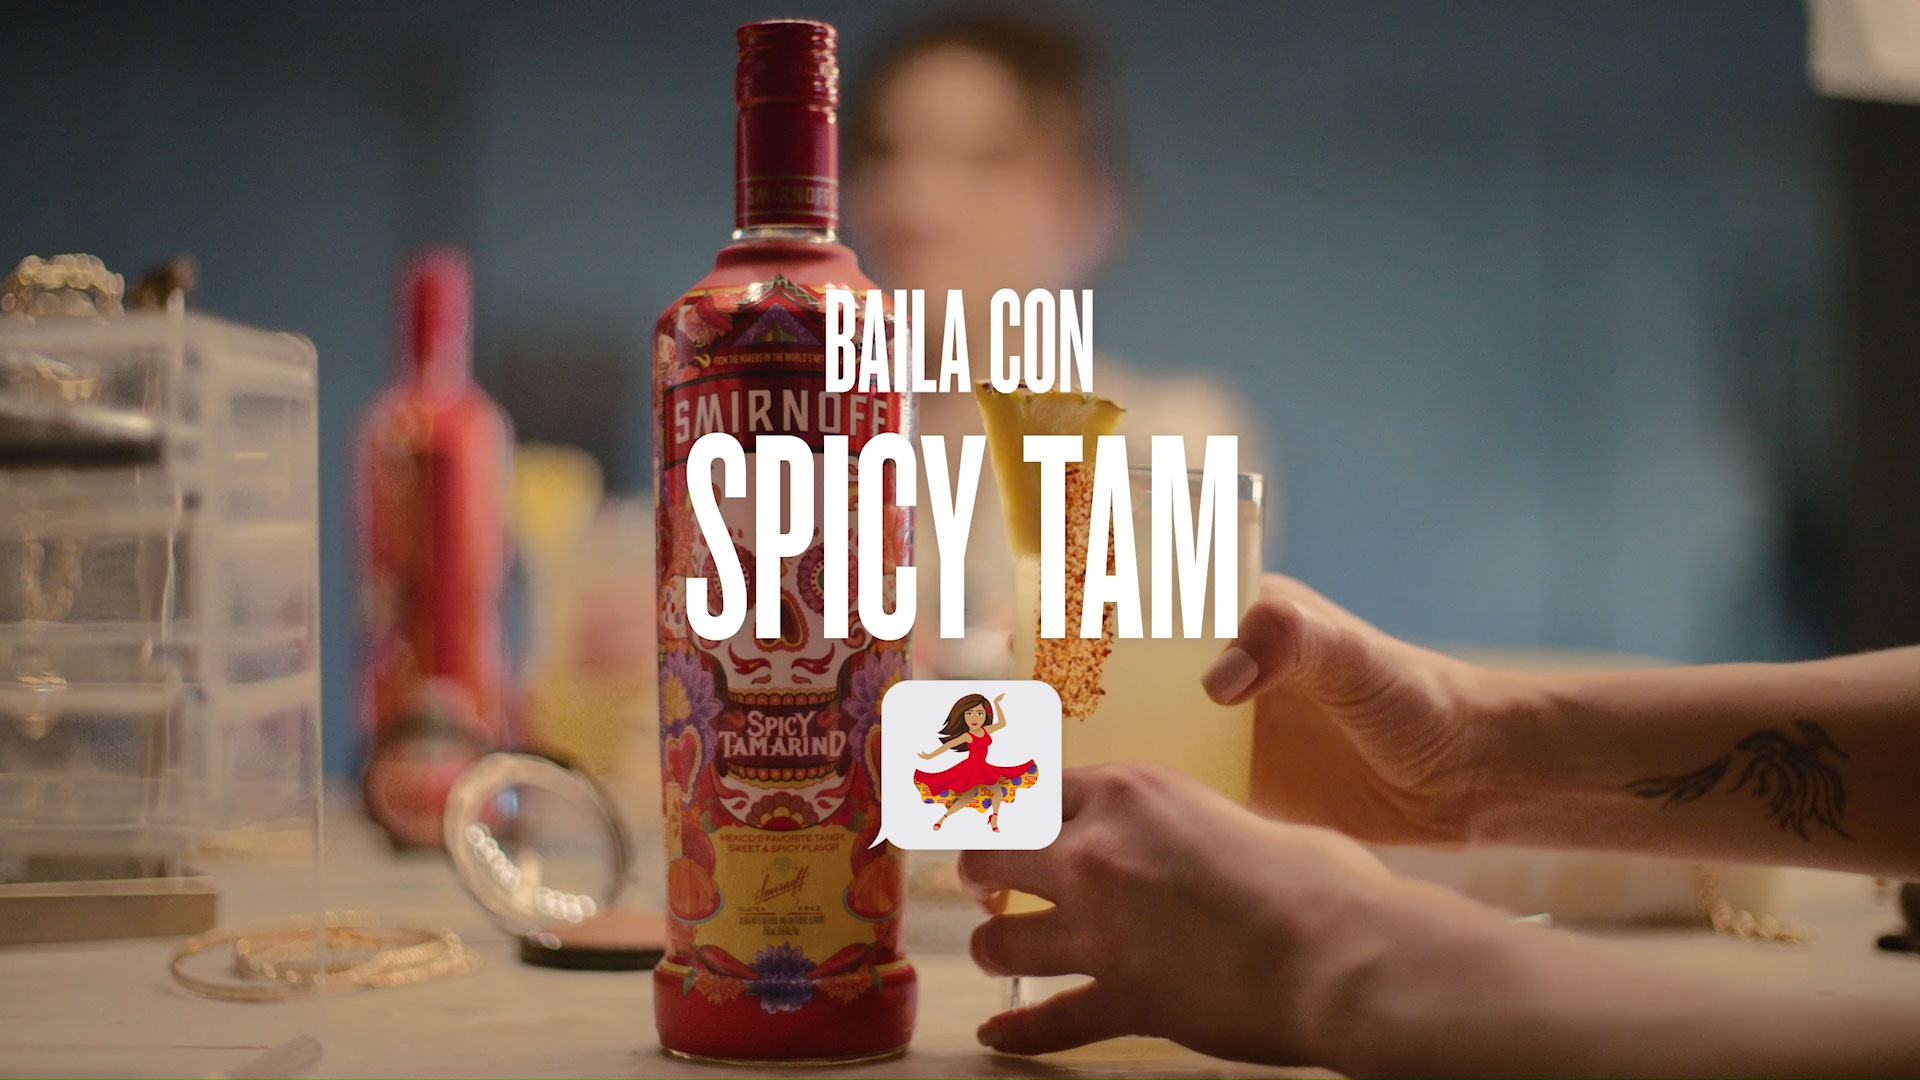 MEET SPICY TAM, THE EMOJI DANCING HER WAY FROM DIGITAL SCREENS TO IRL SCENES AS THE NEW FACE OF SMIRNOFF SPICY TAMARIND [Video]